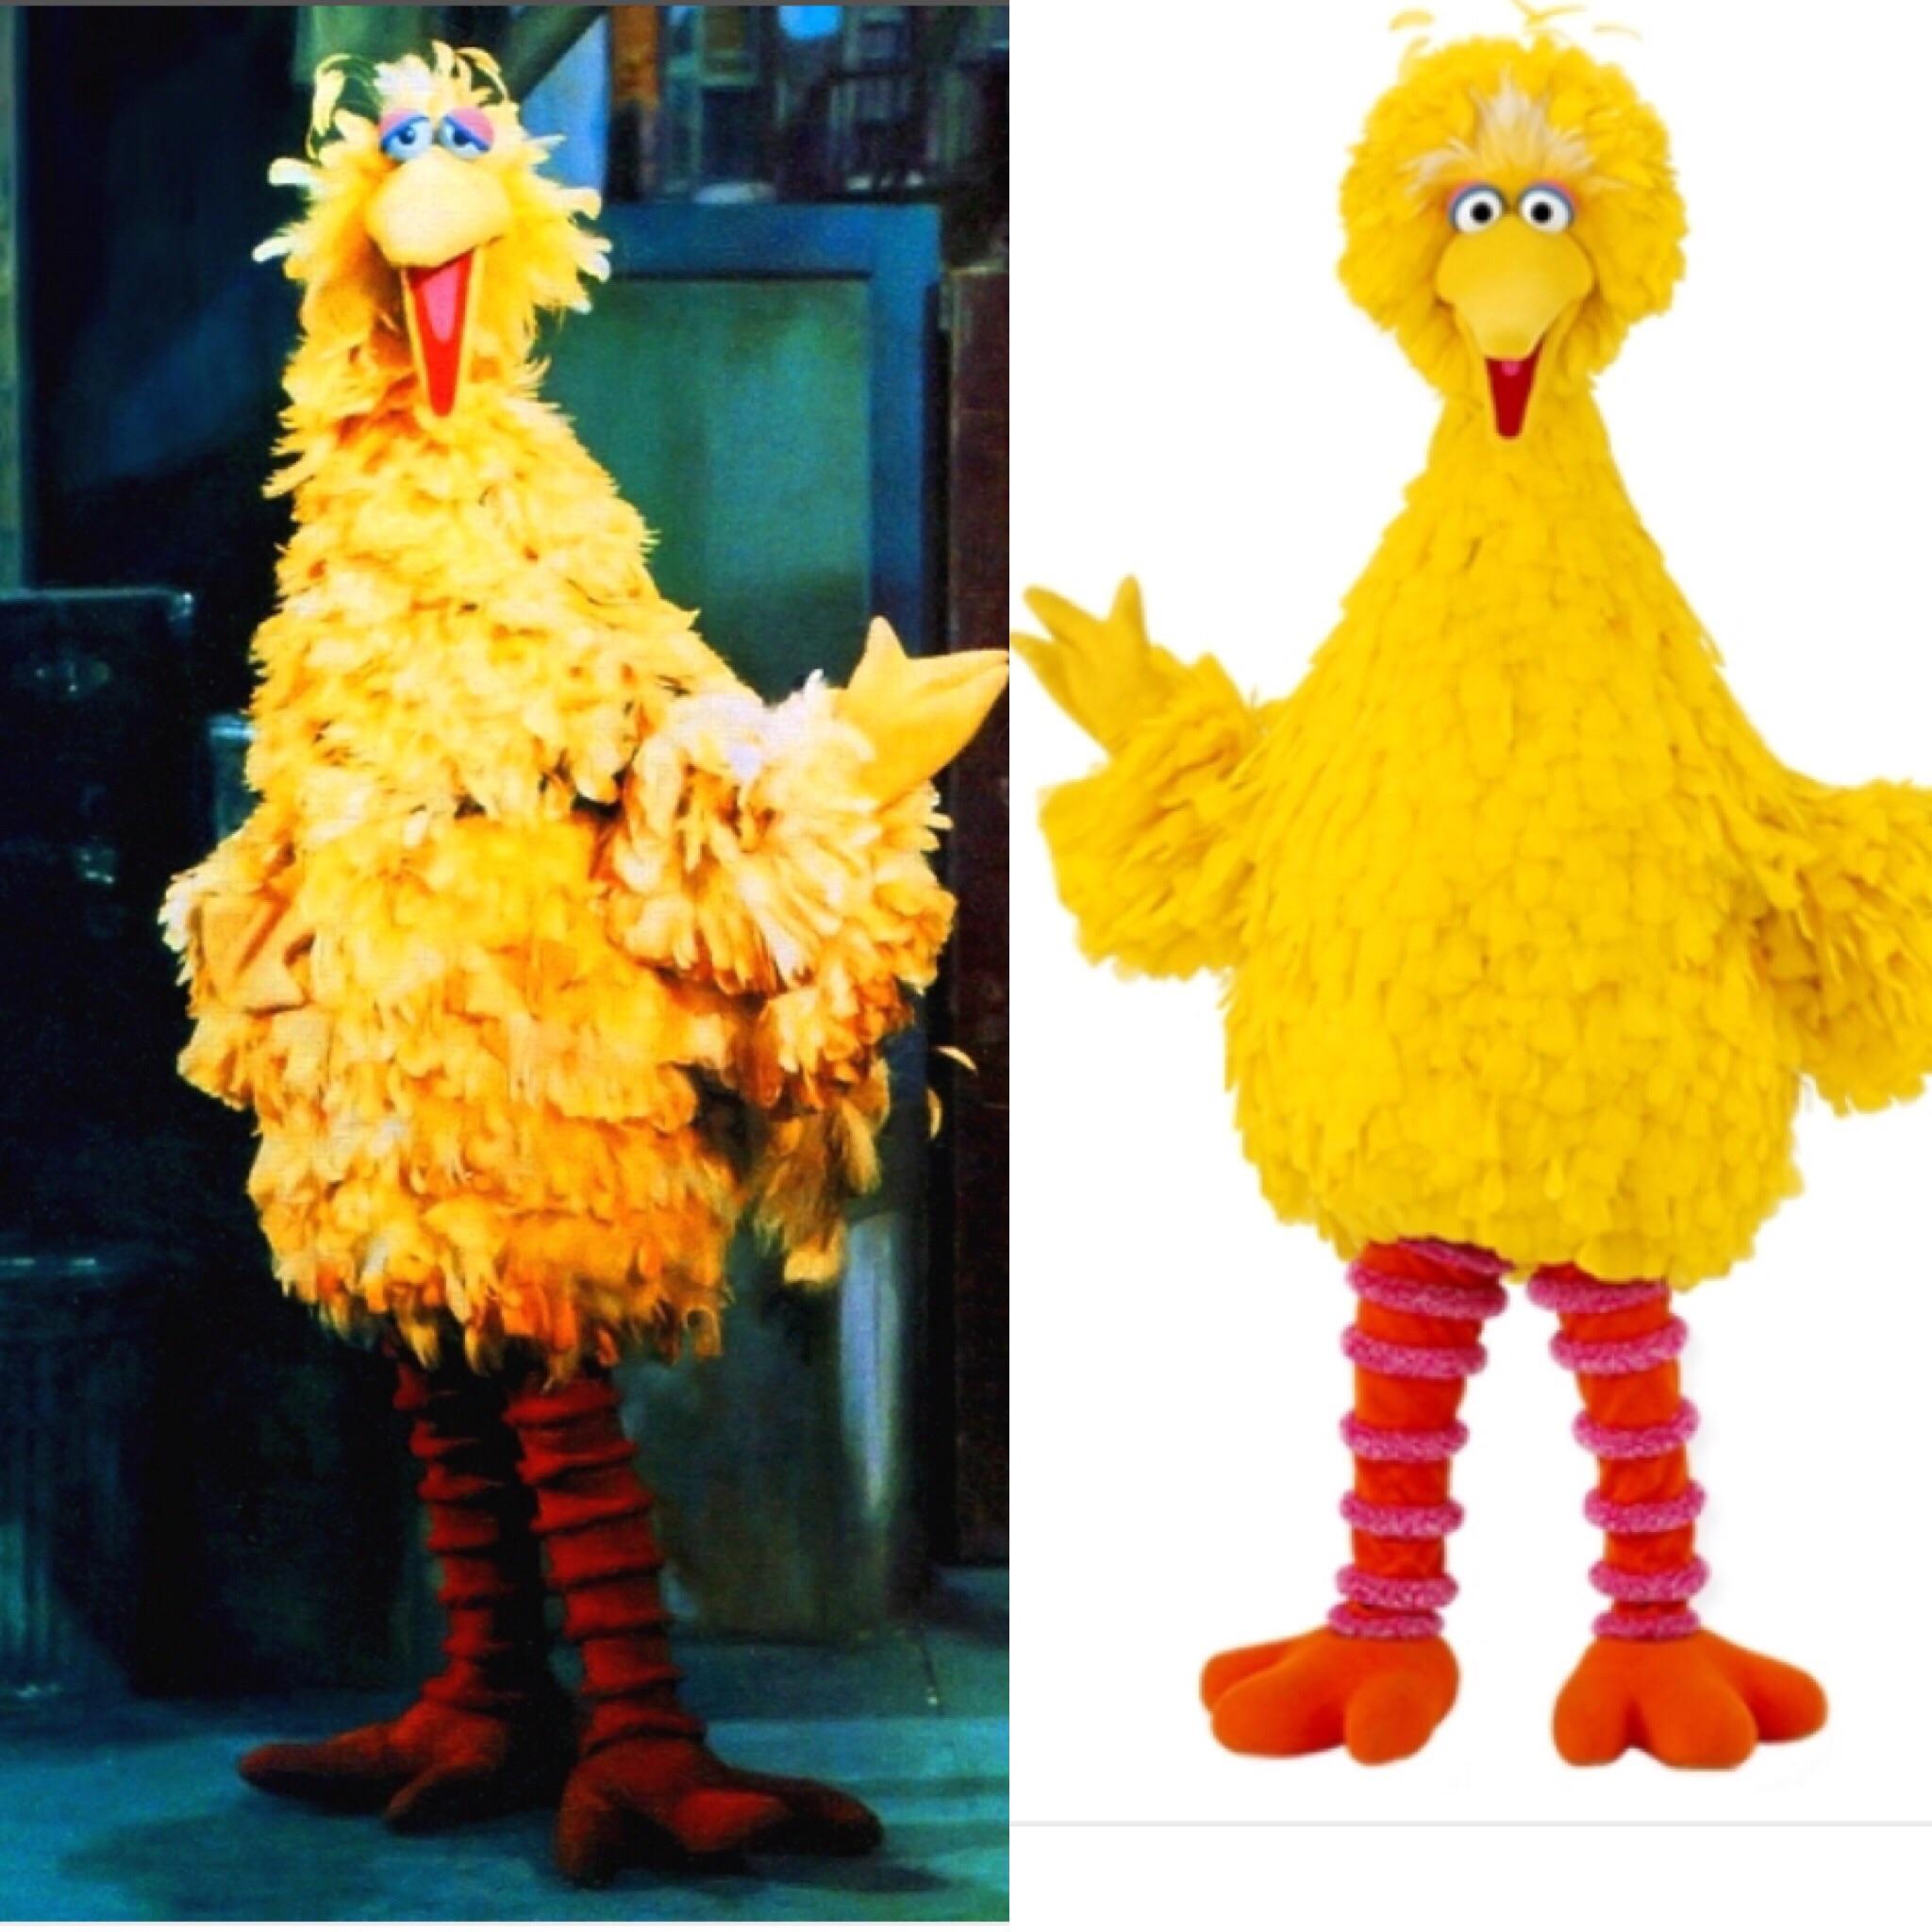 Big Bird then (1969) and now. : pics